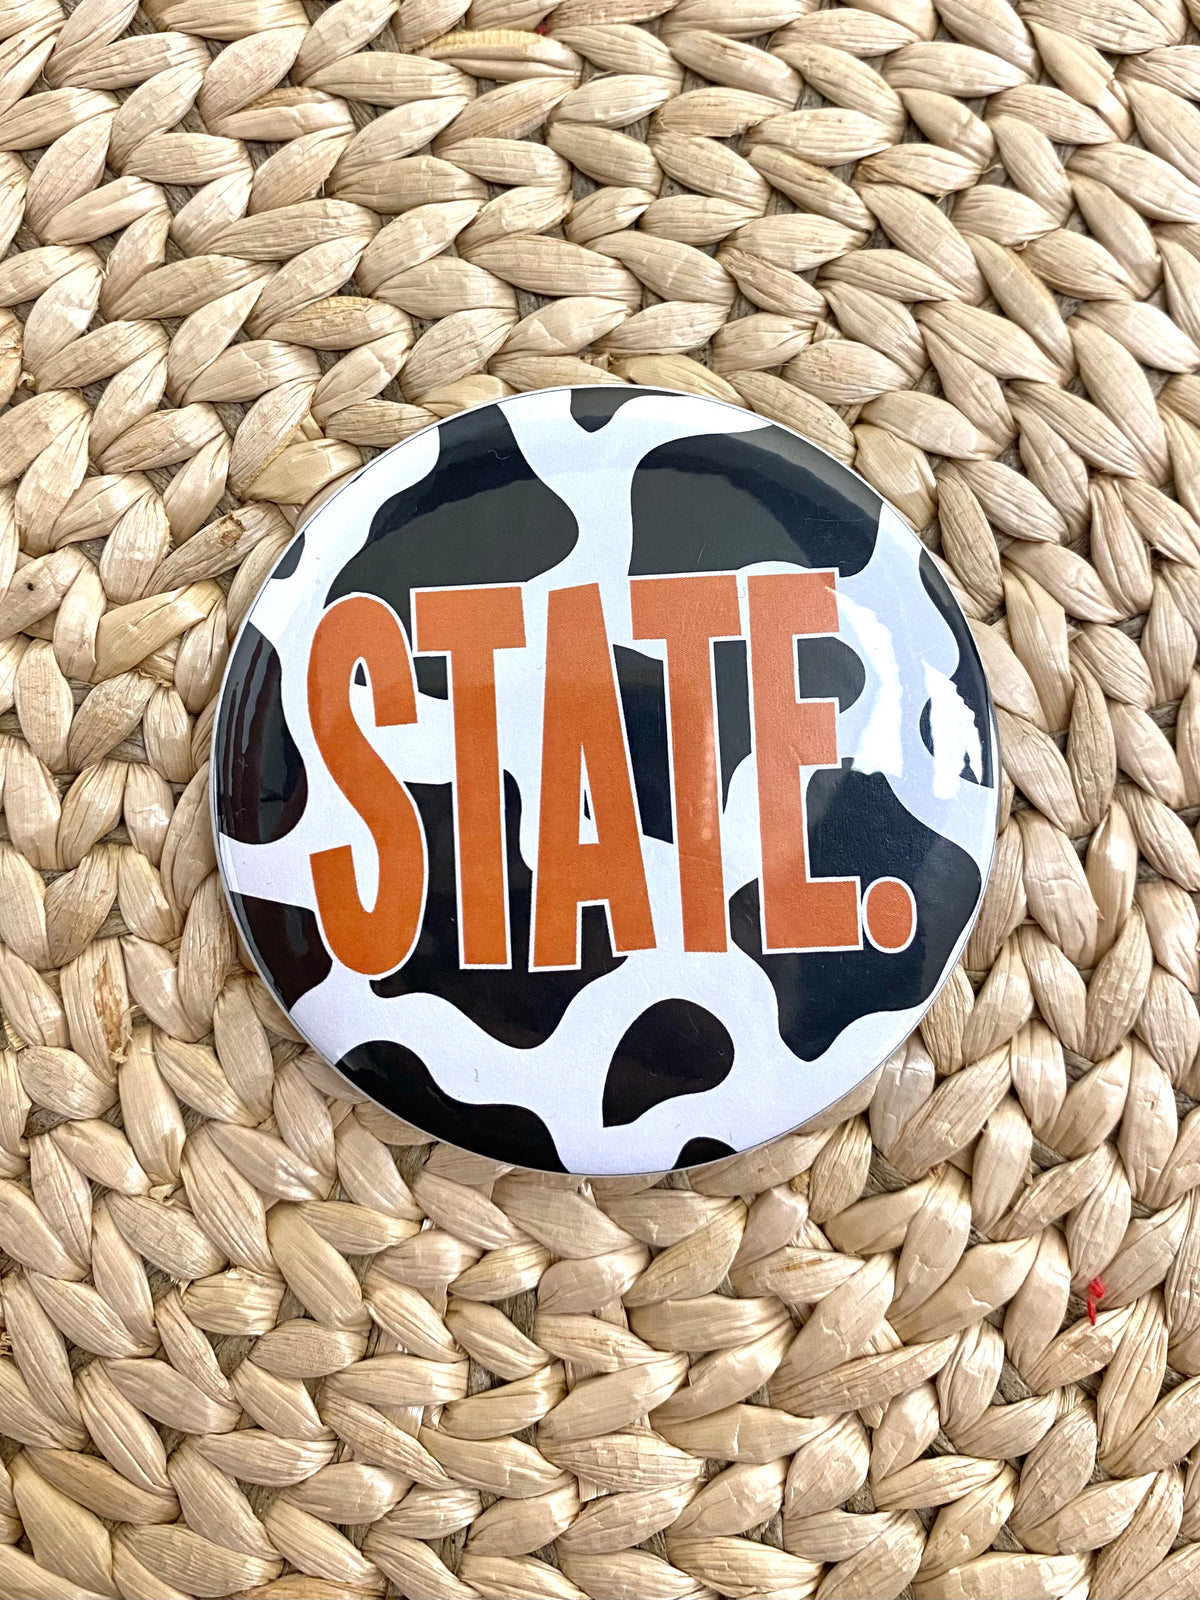 Cow state 3 inch button black/white - Trendy Gifts at Lush Fashion Lounge Boutique in Oklahoma City